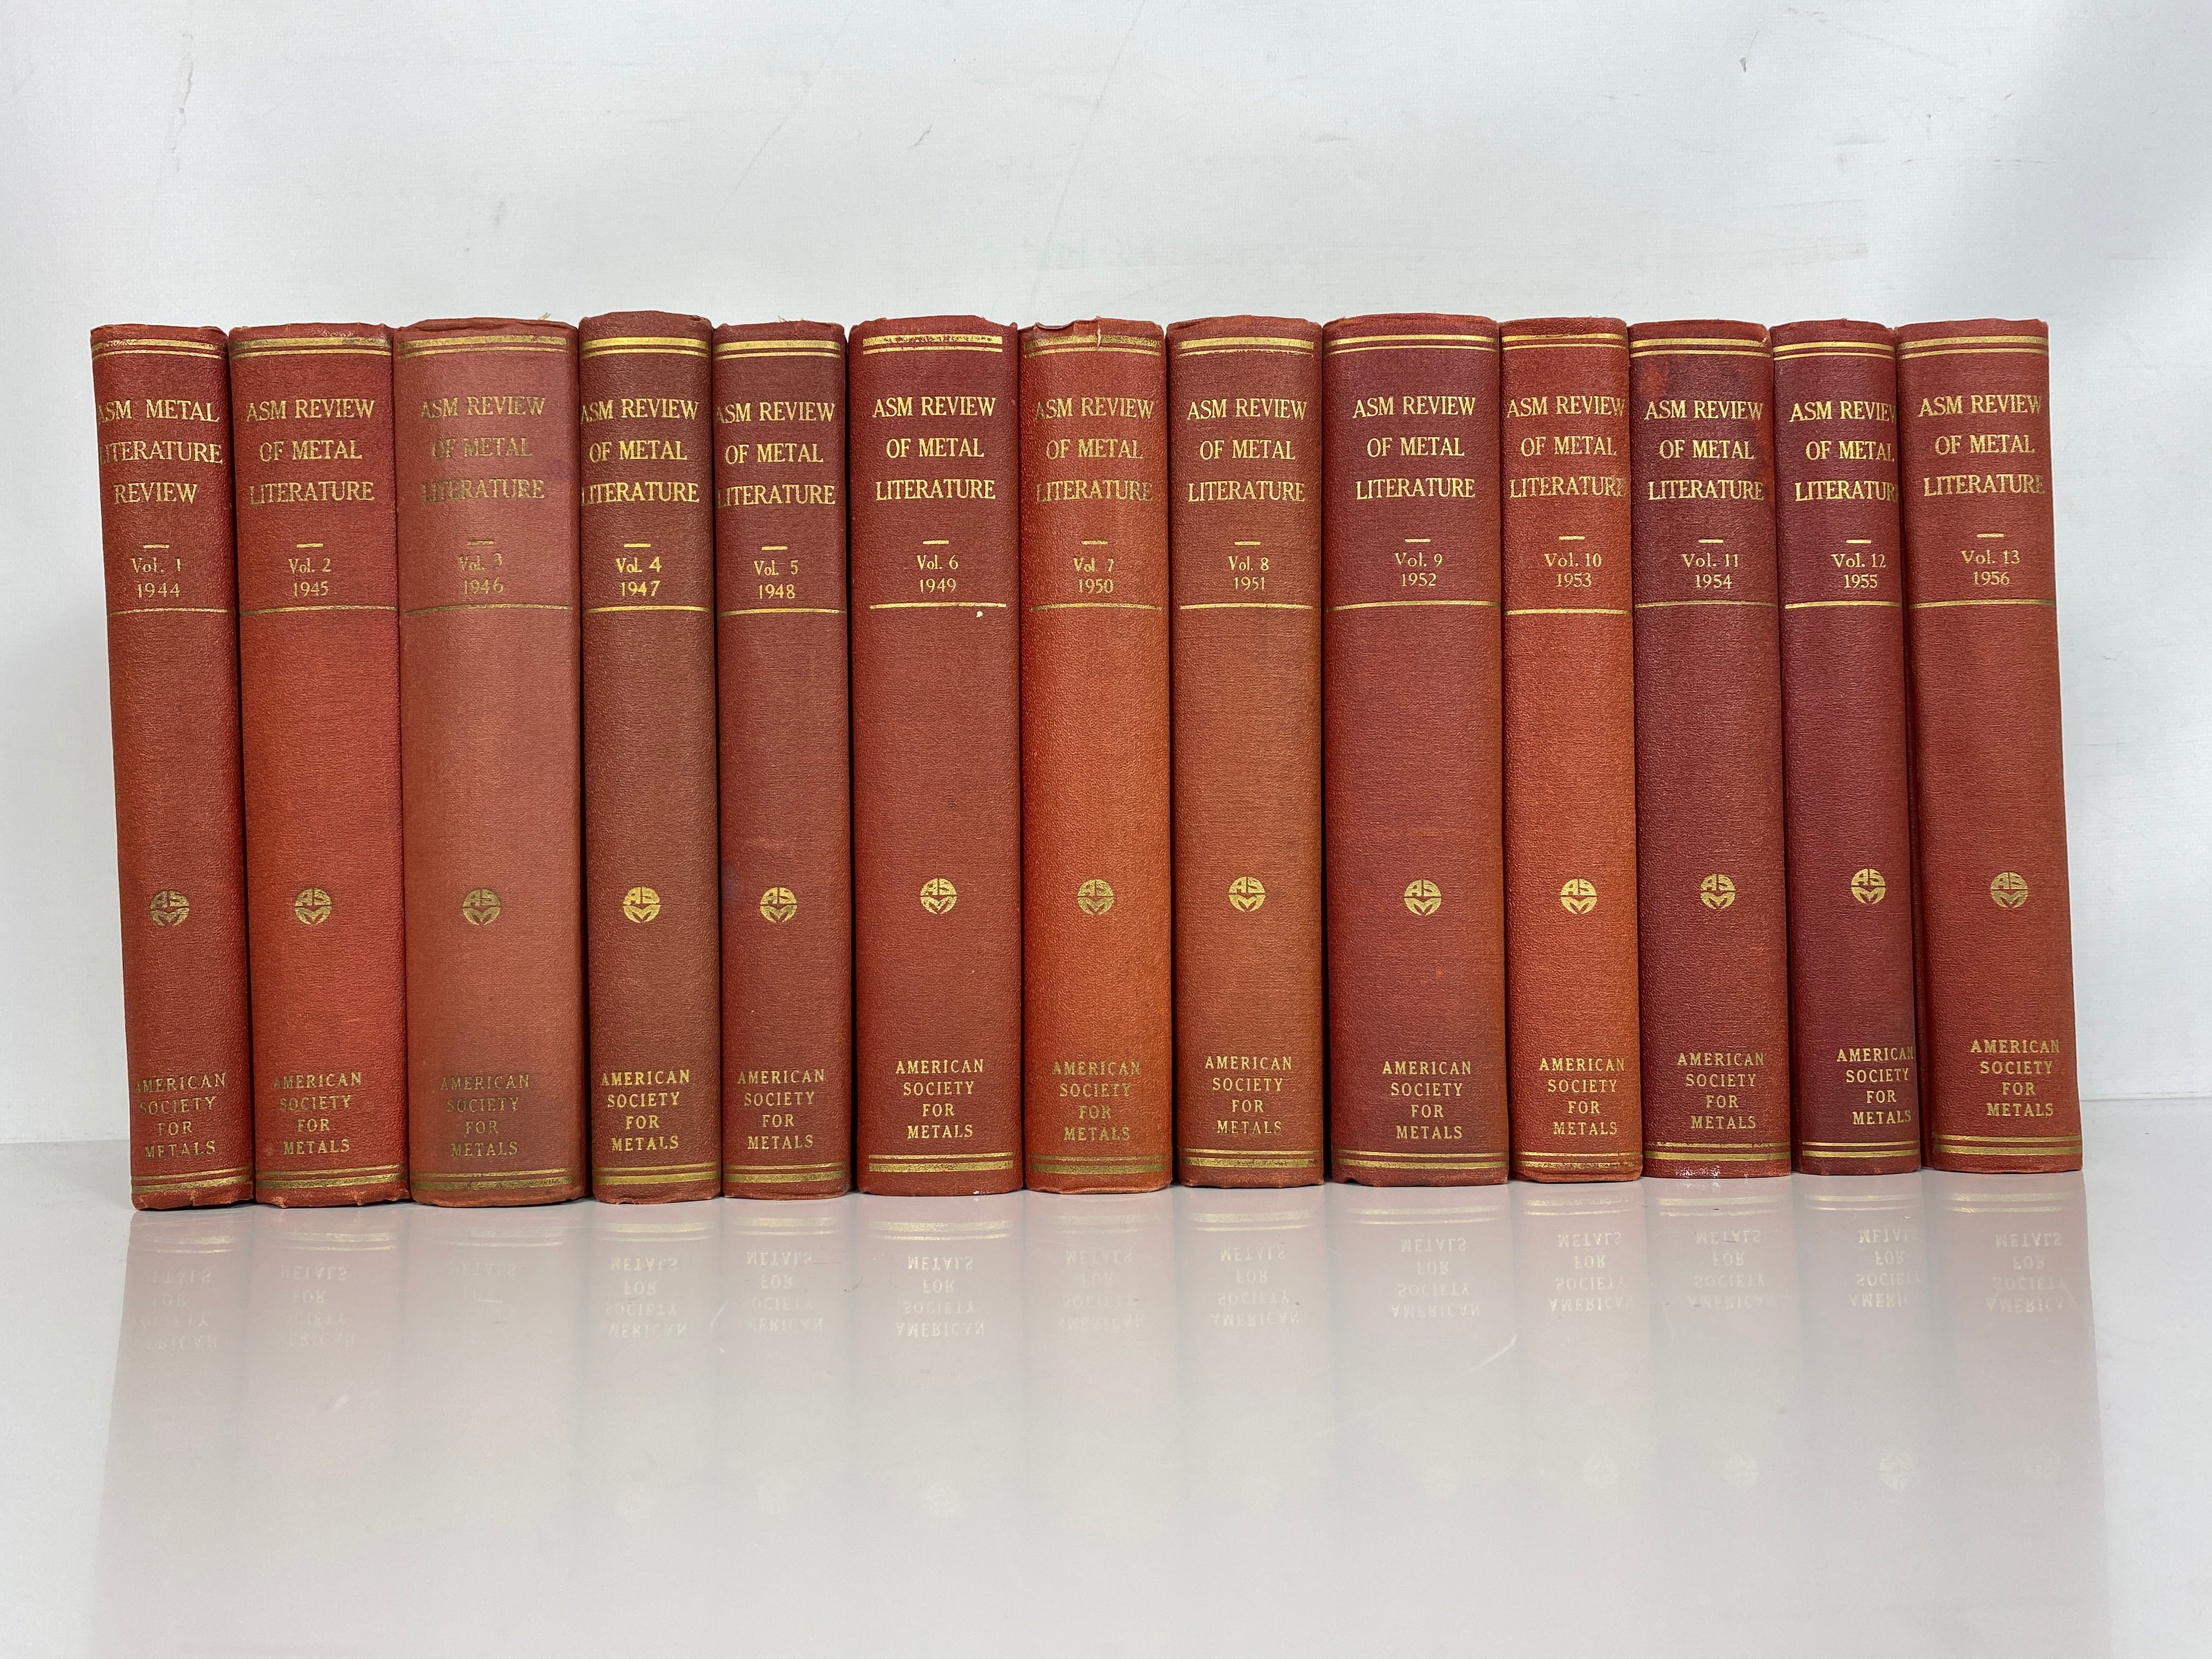 Lot of 13 American Society for Metals Review of Metal Literature Volume 1 (1944)-Volume 13 (1956) HC